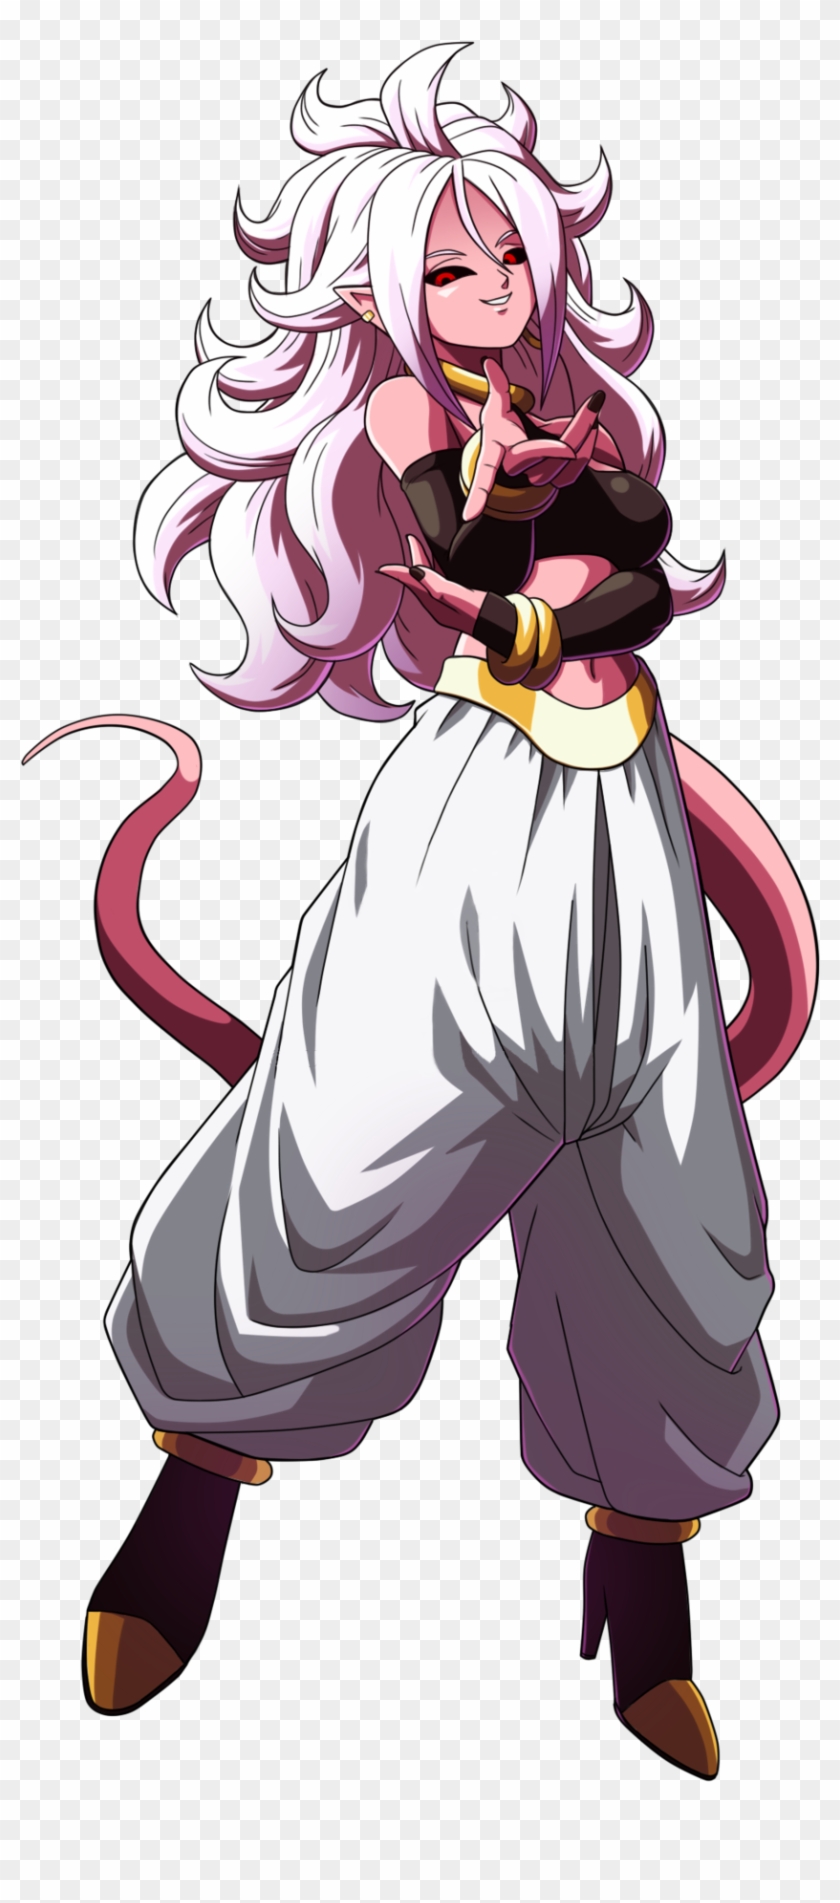 Dragon Ball Fighterz Transparent Image - Dragon Ball Android 21 Clipart